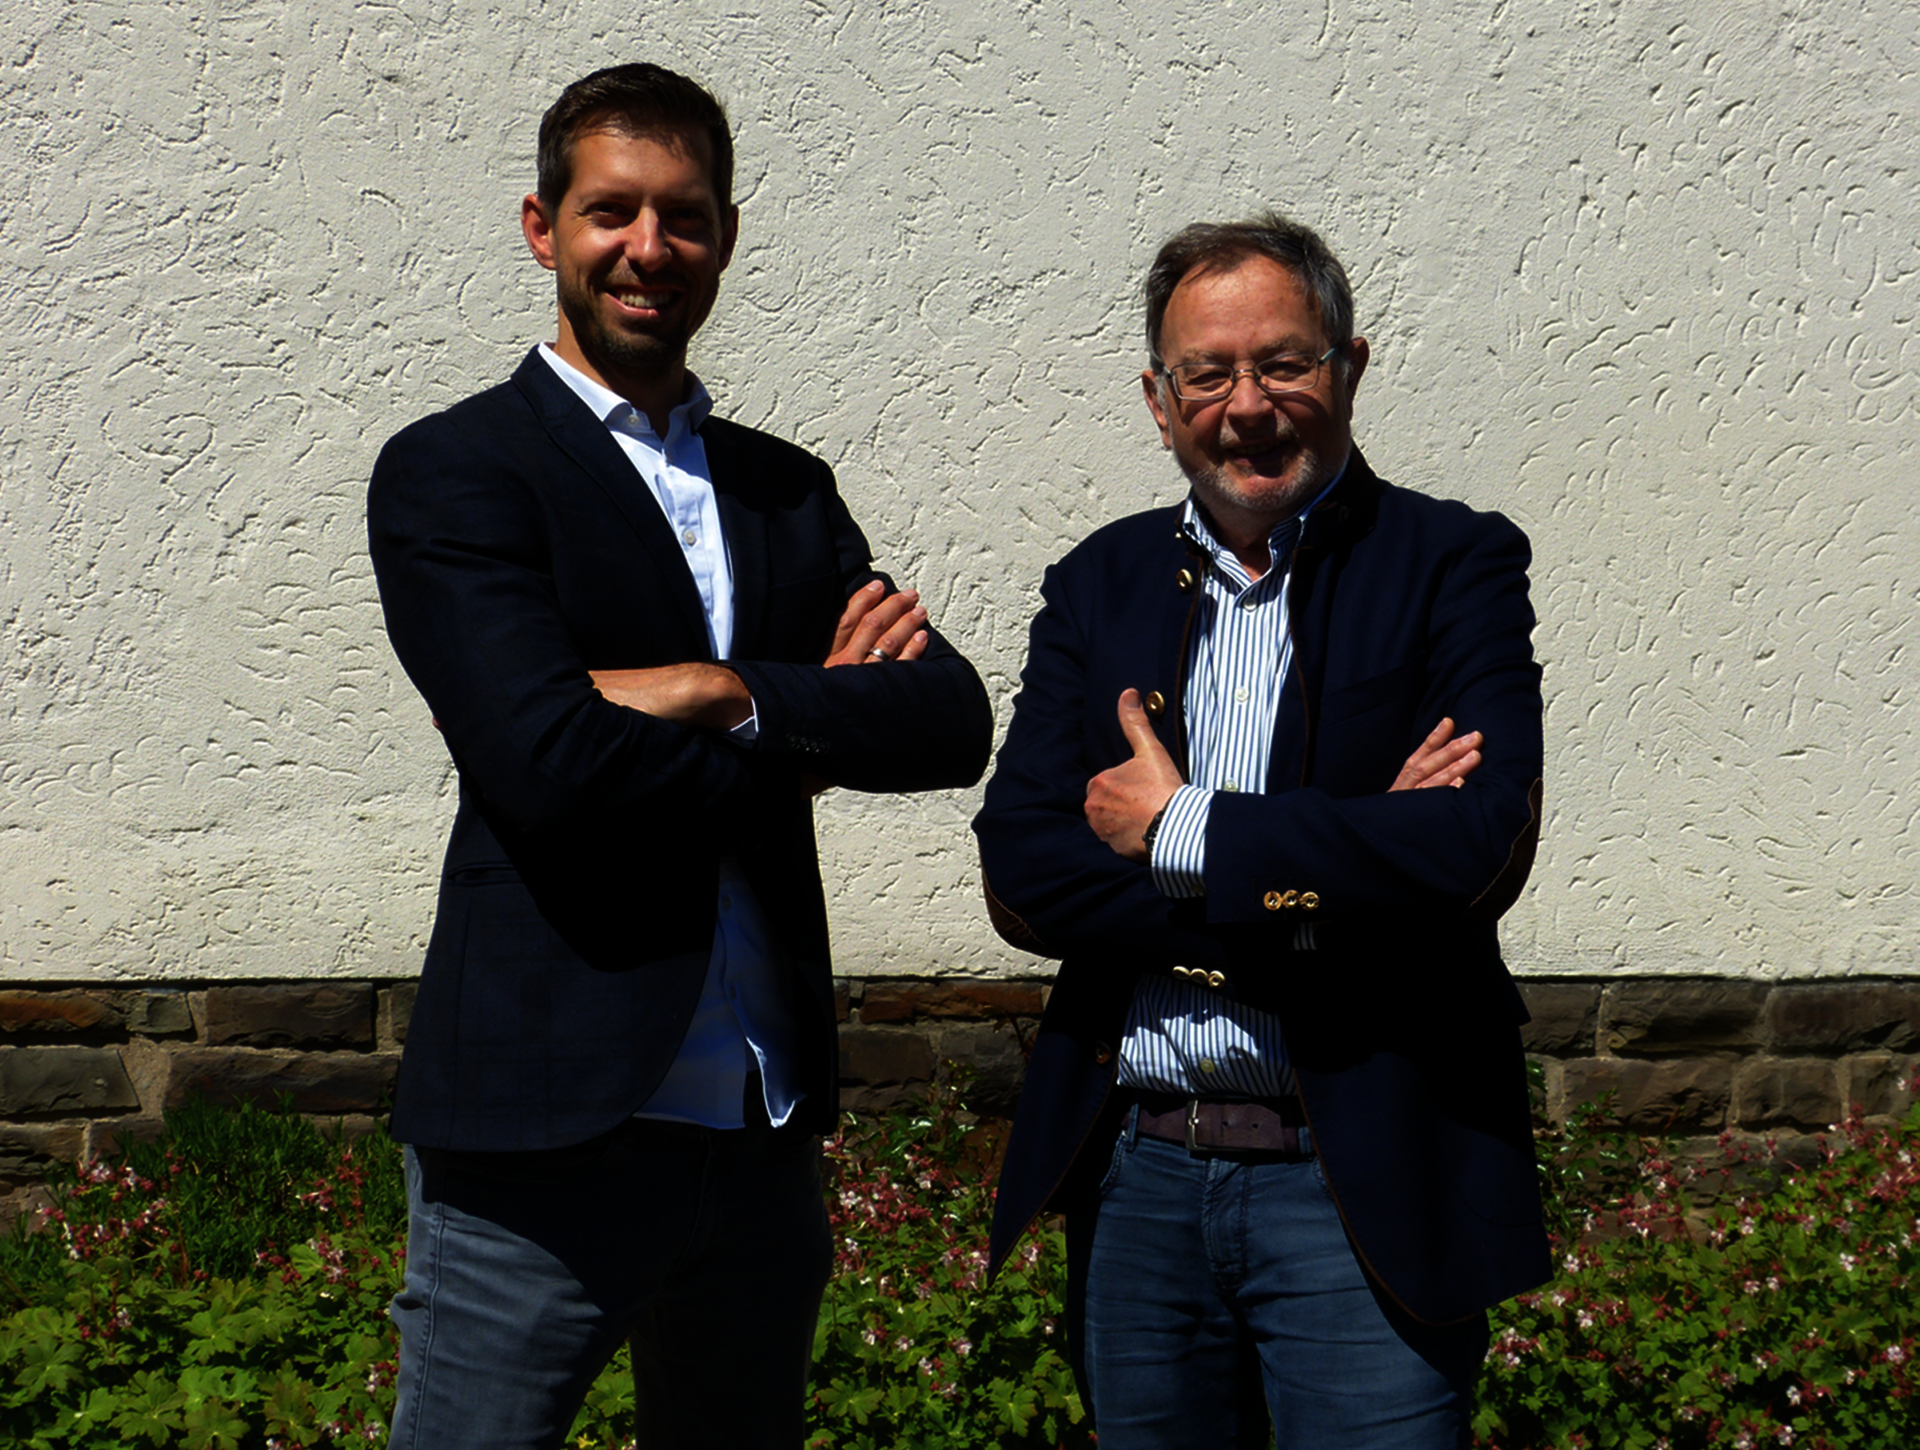 Managing directors Christian Rothe and Gert Busch